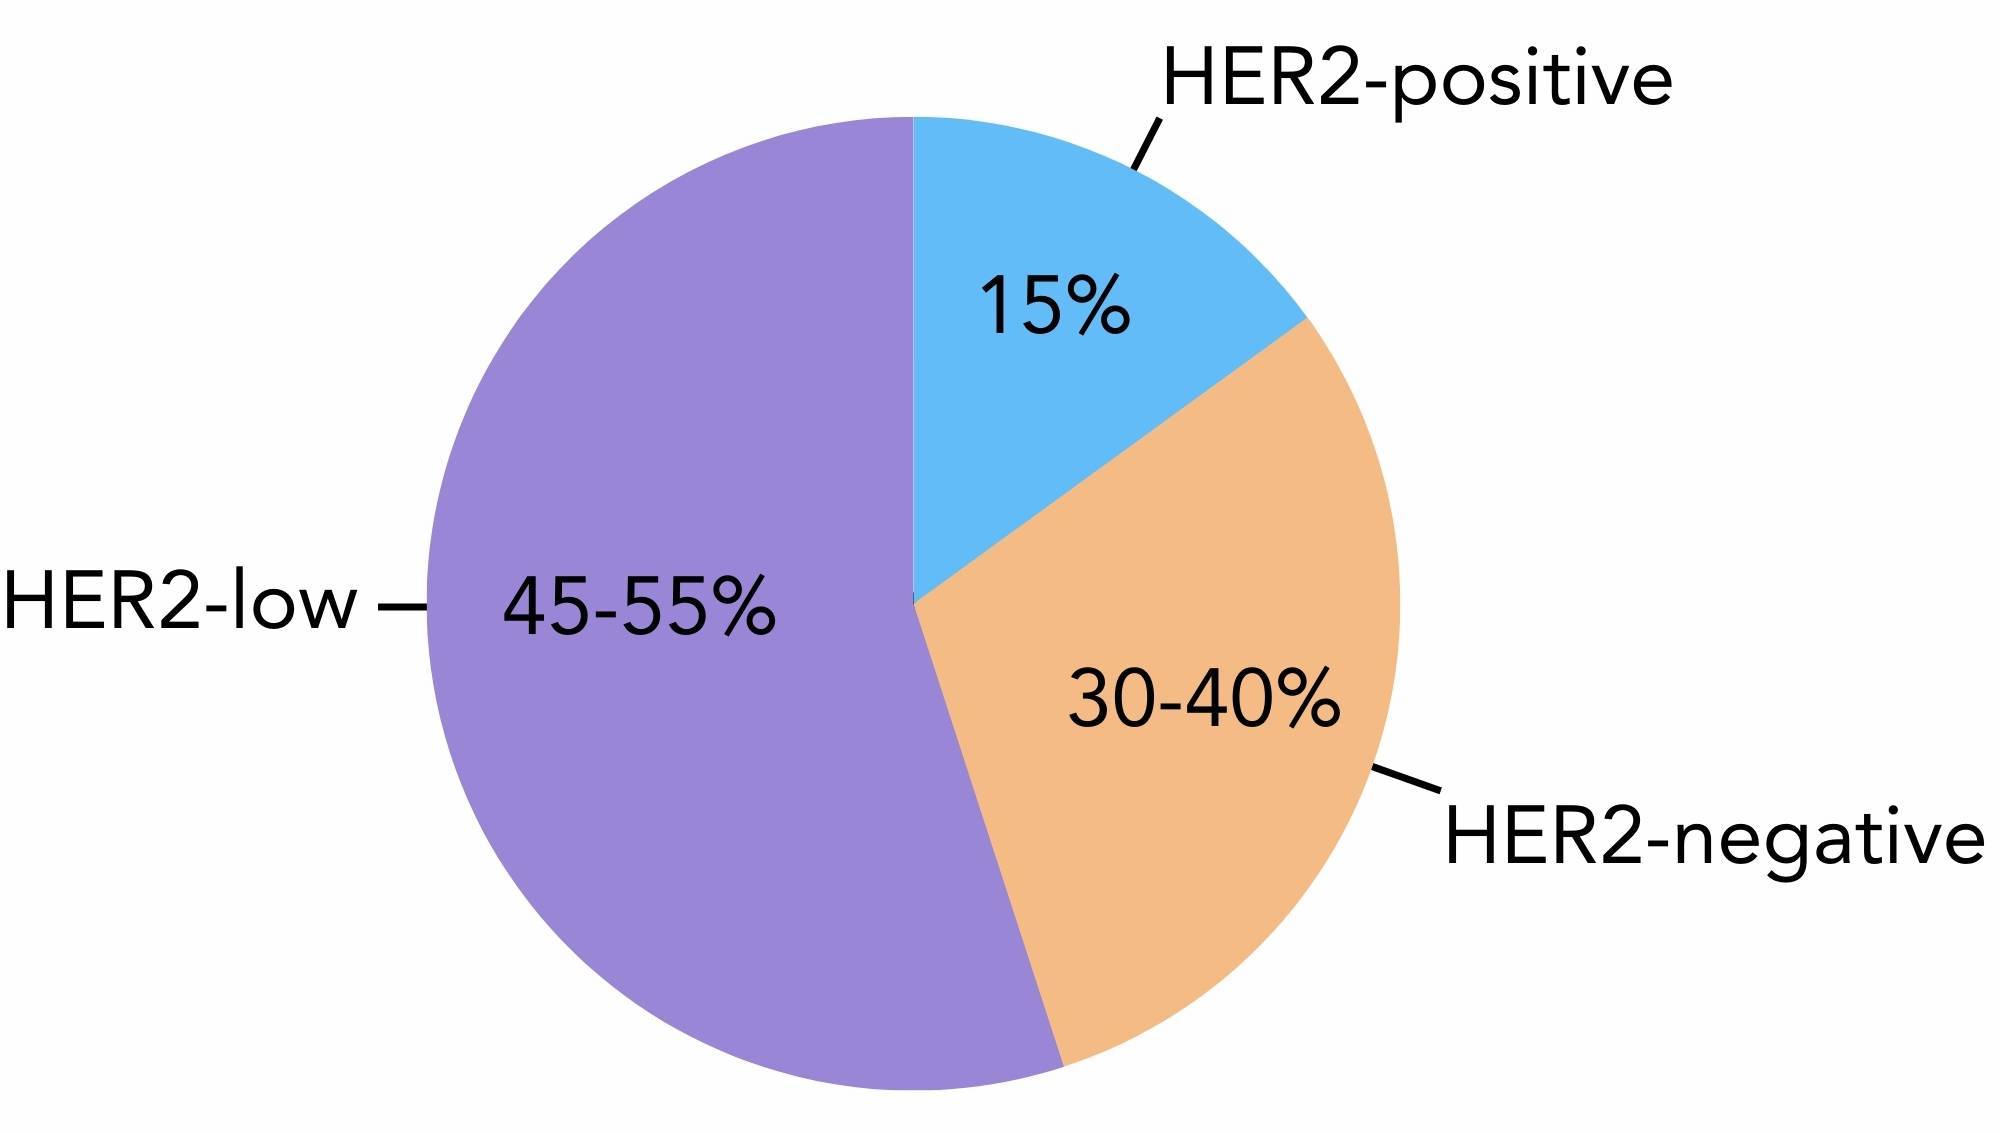 A pie chart showing the proportion of breast cancer cases that are HER2-positive (HER2+), HER2-low and HER2-negative (HER2-).